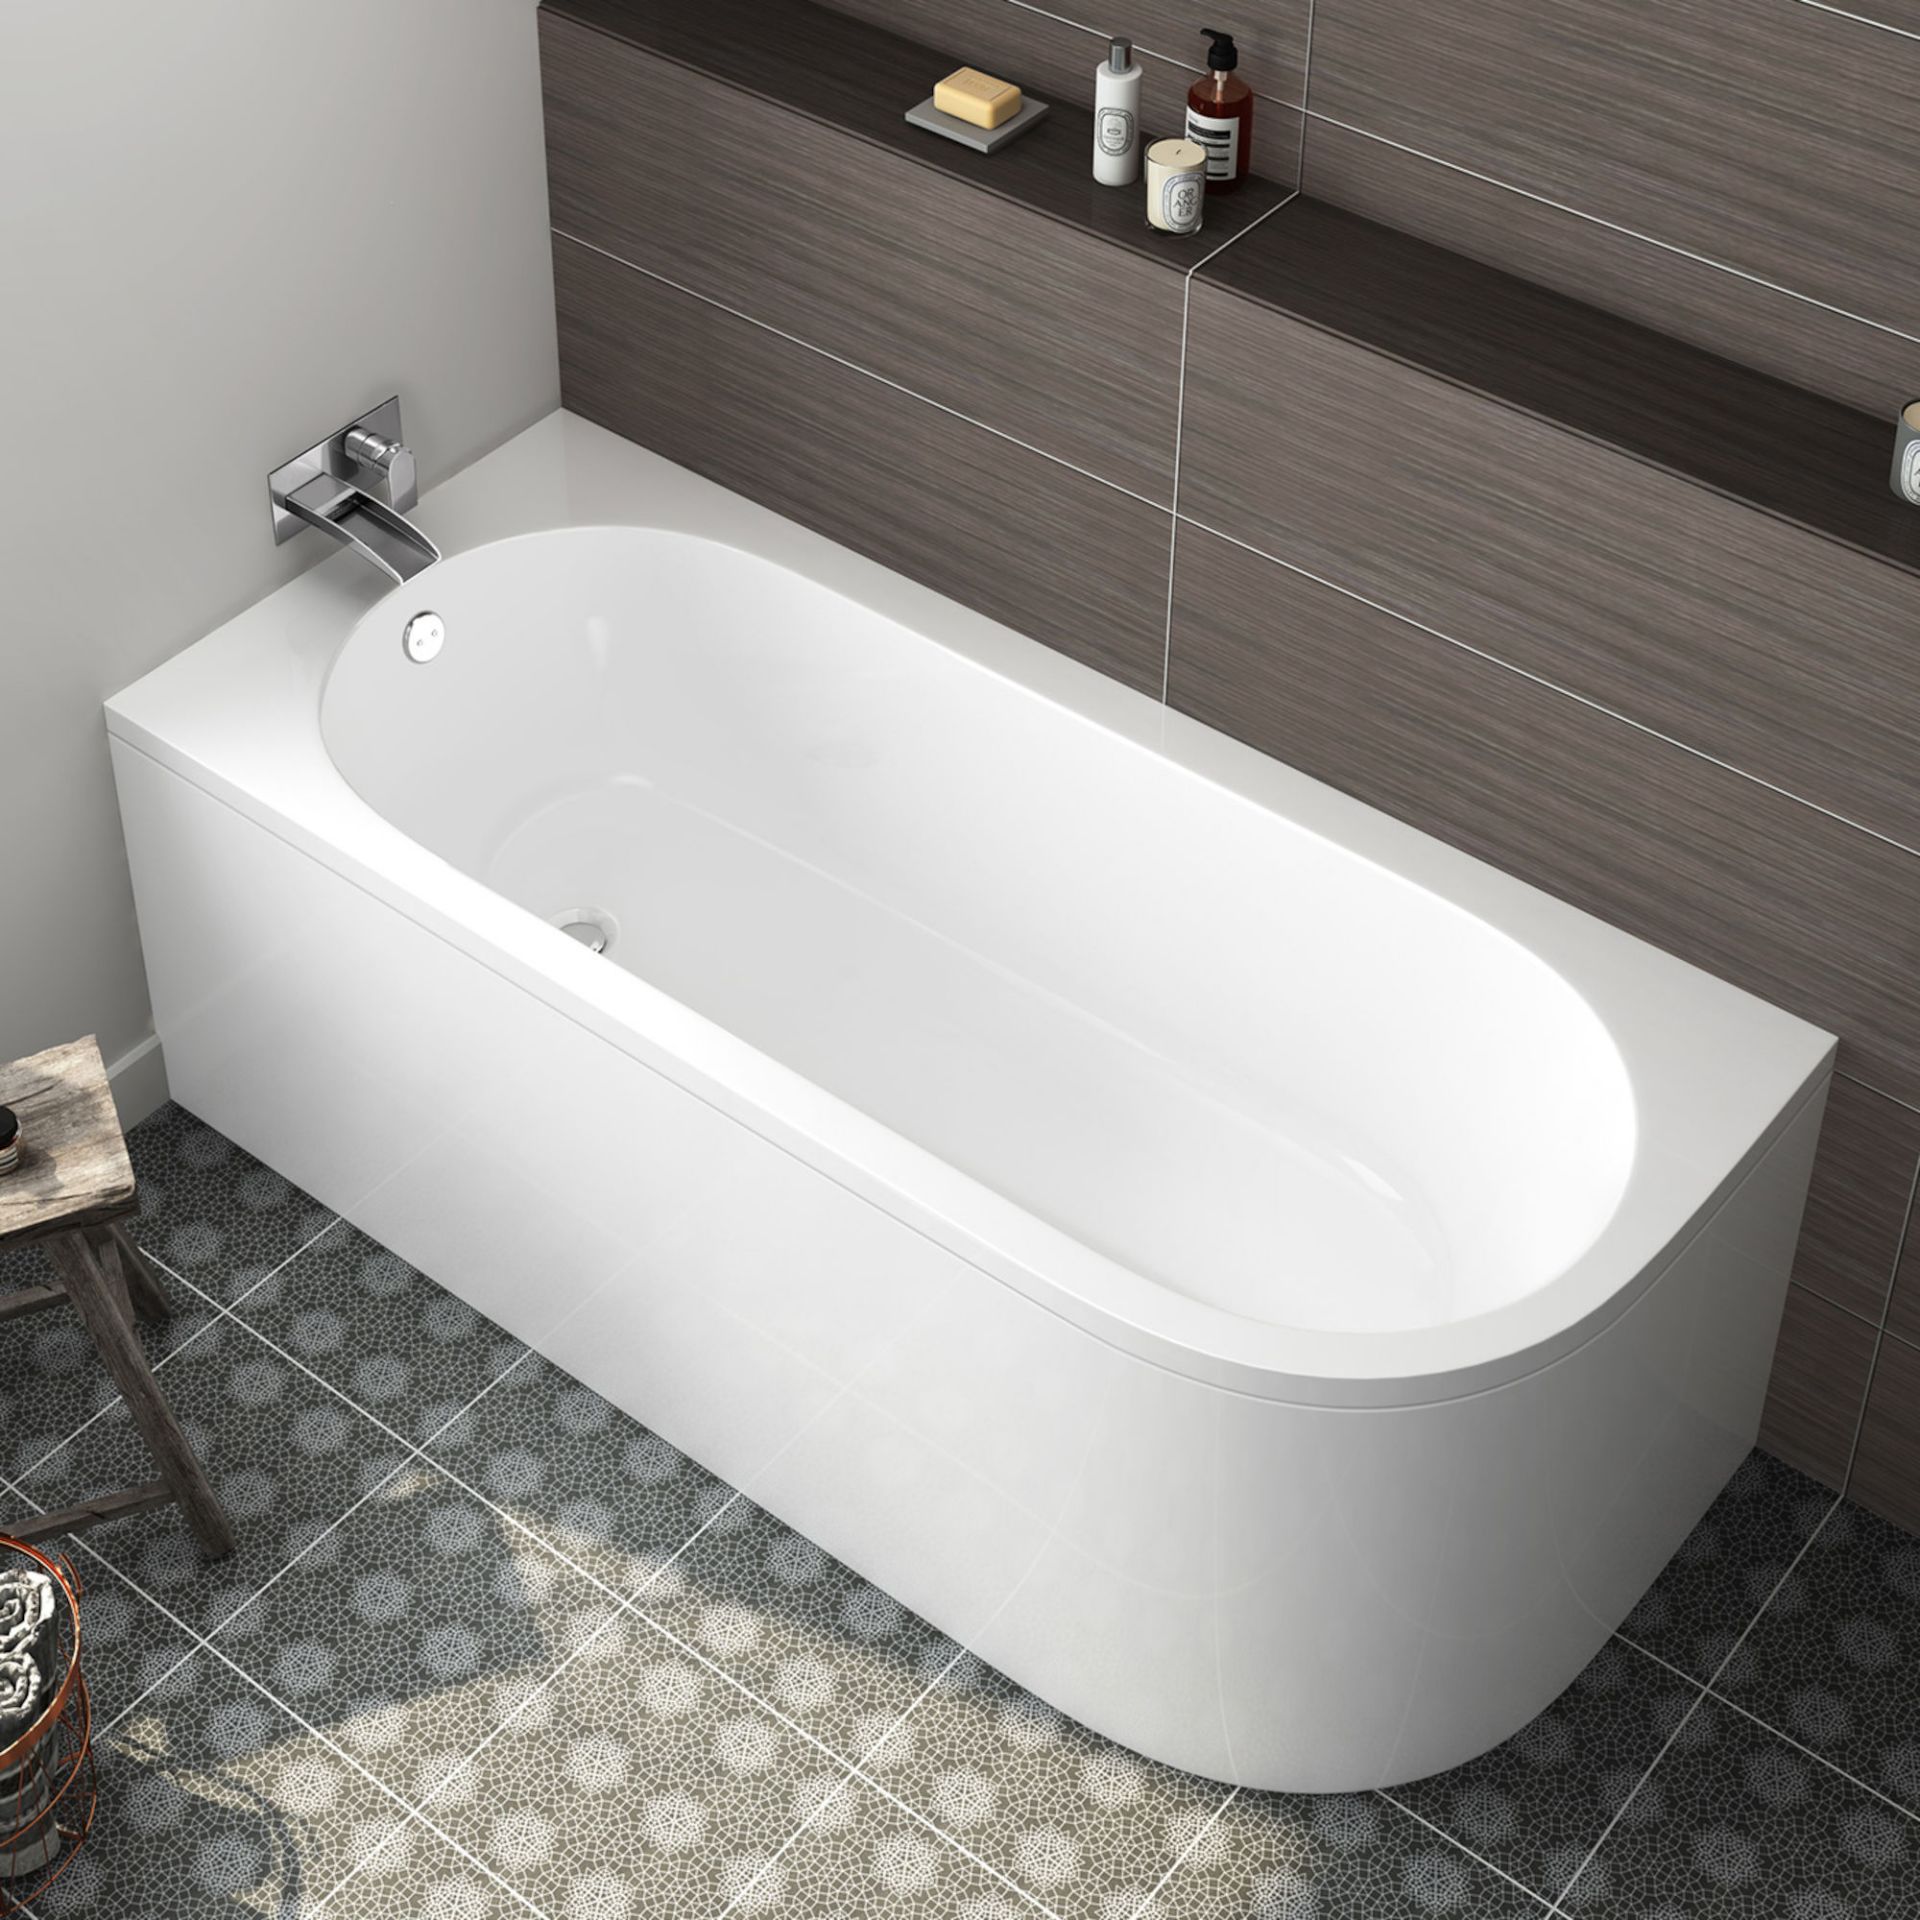 (AA35) 1700mm Denver Corner Back to Wall Bath- Left Hand. RRP £499.99. Double ended feature ... - Image 3 of 6